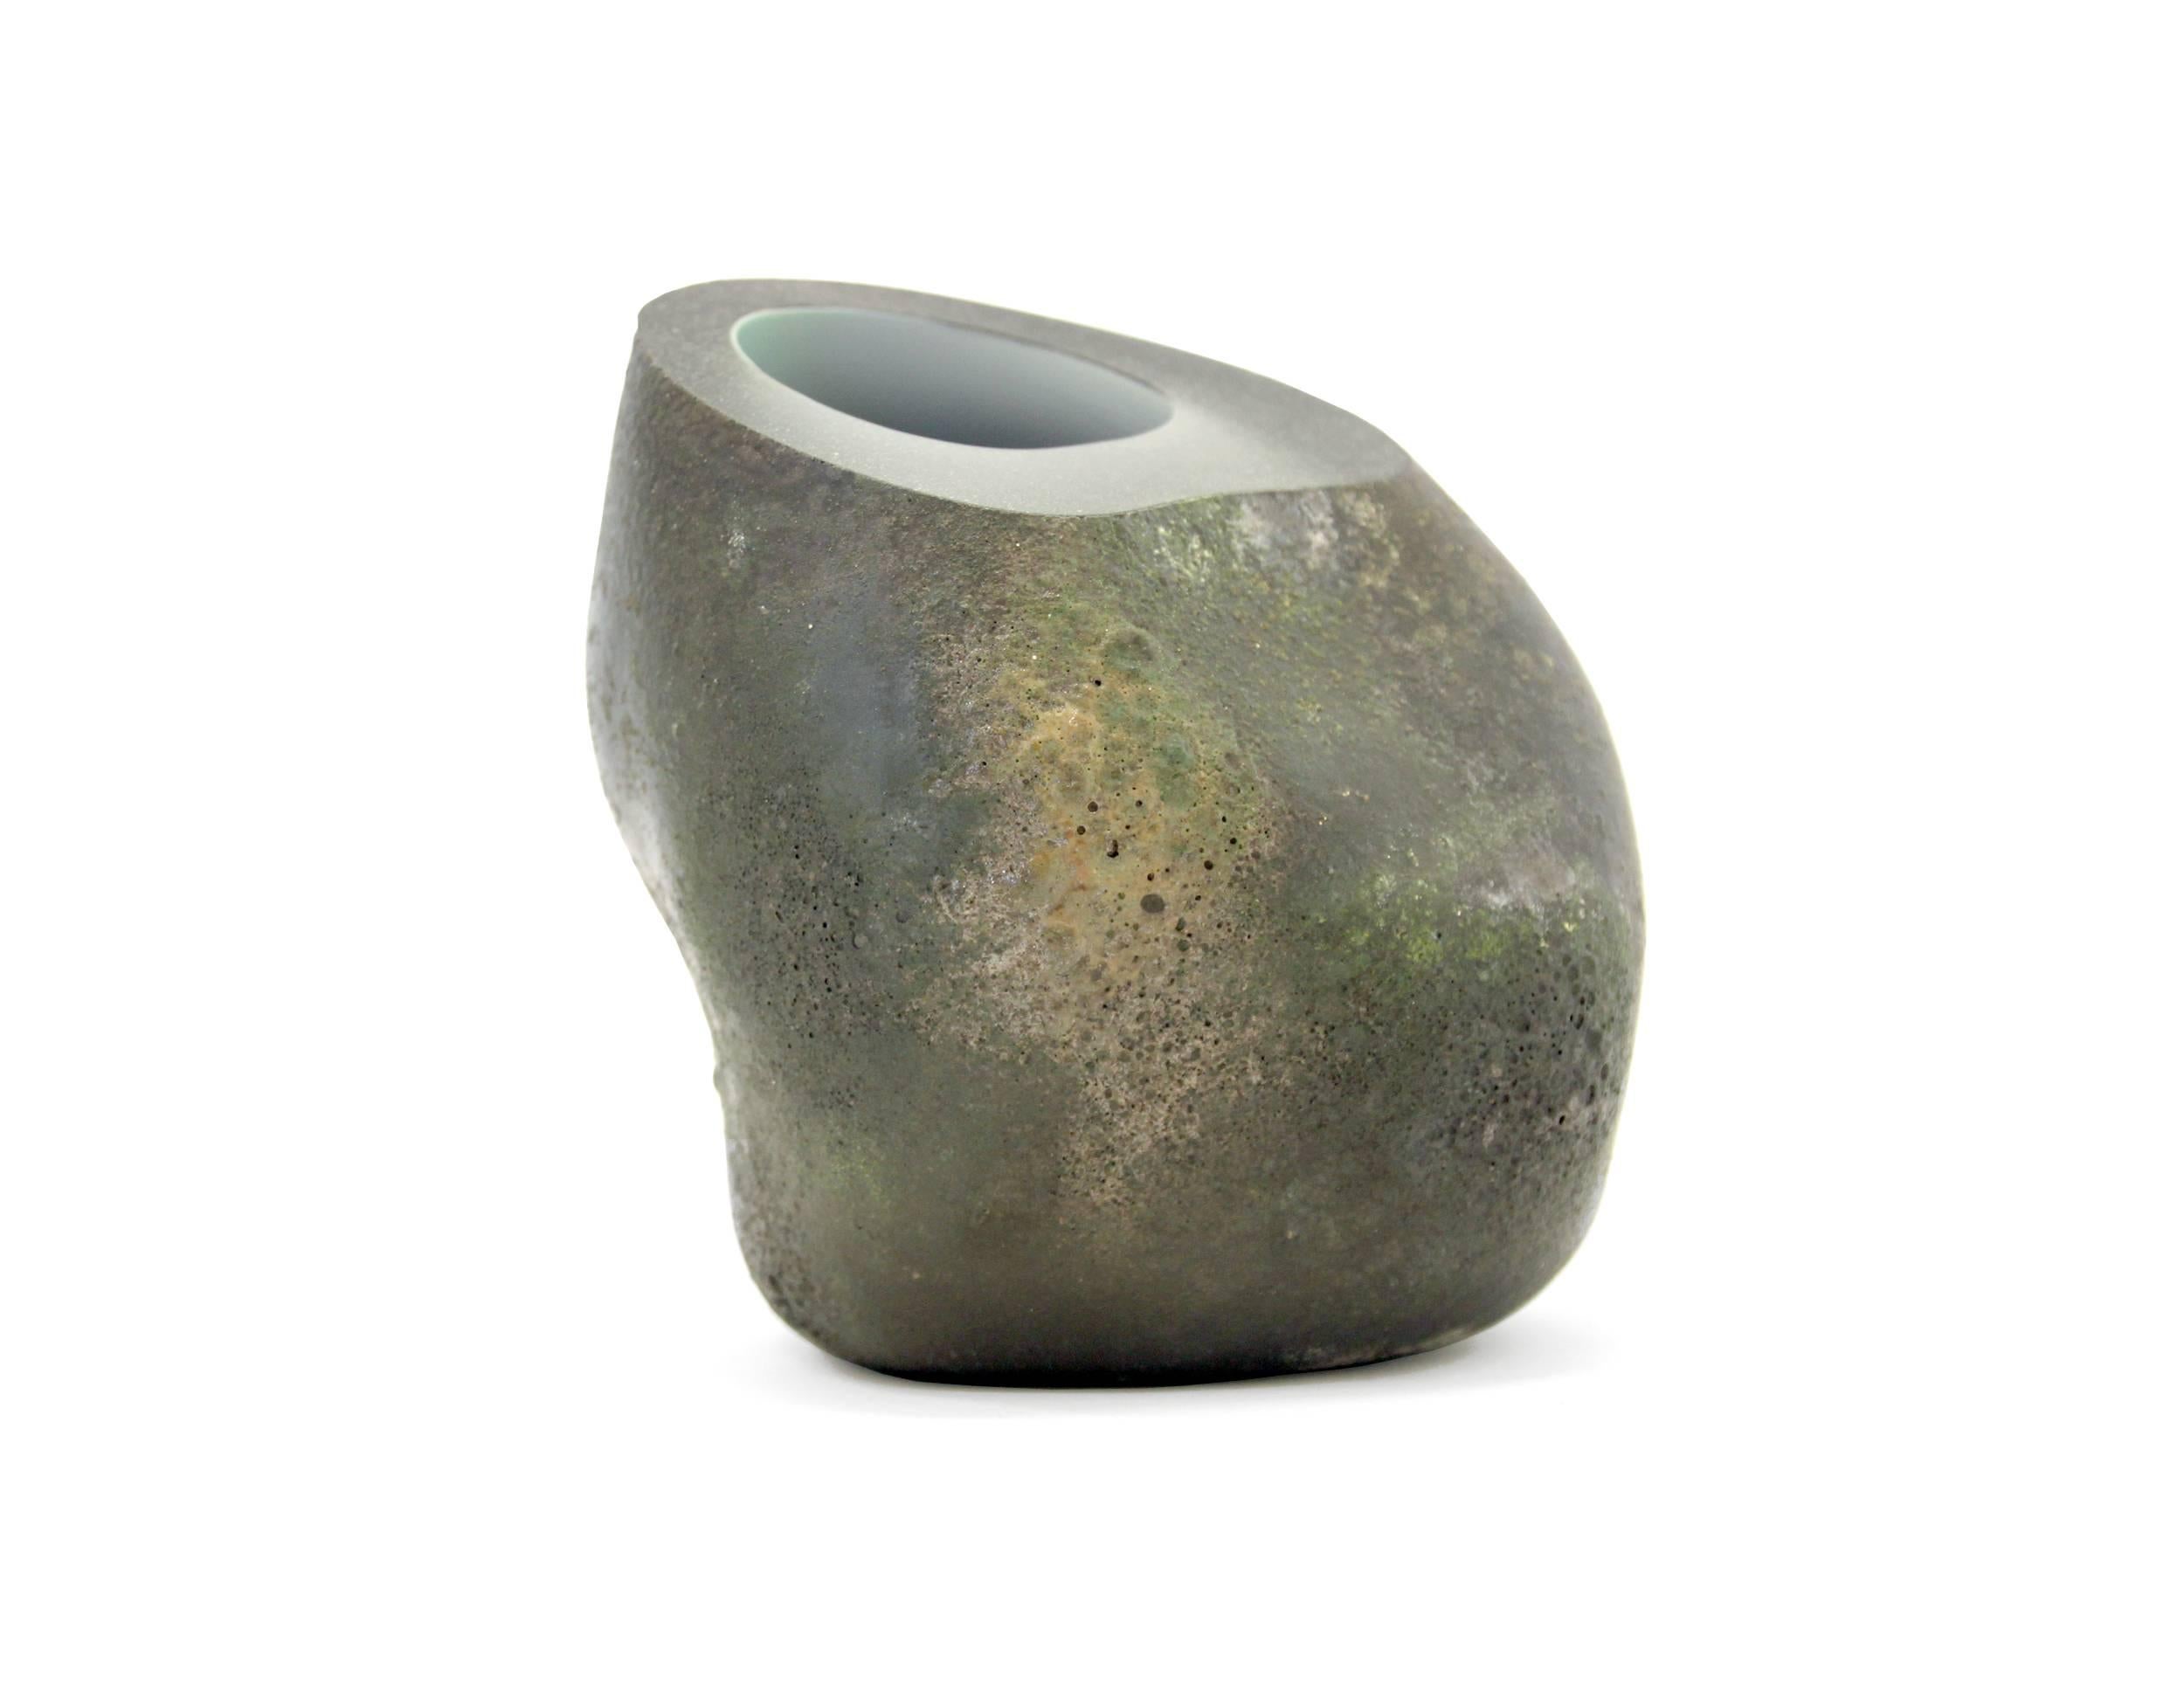 Organic Modern Unique Glass Vase by Geir Nustad, 2014 For Sale